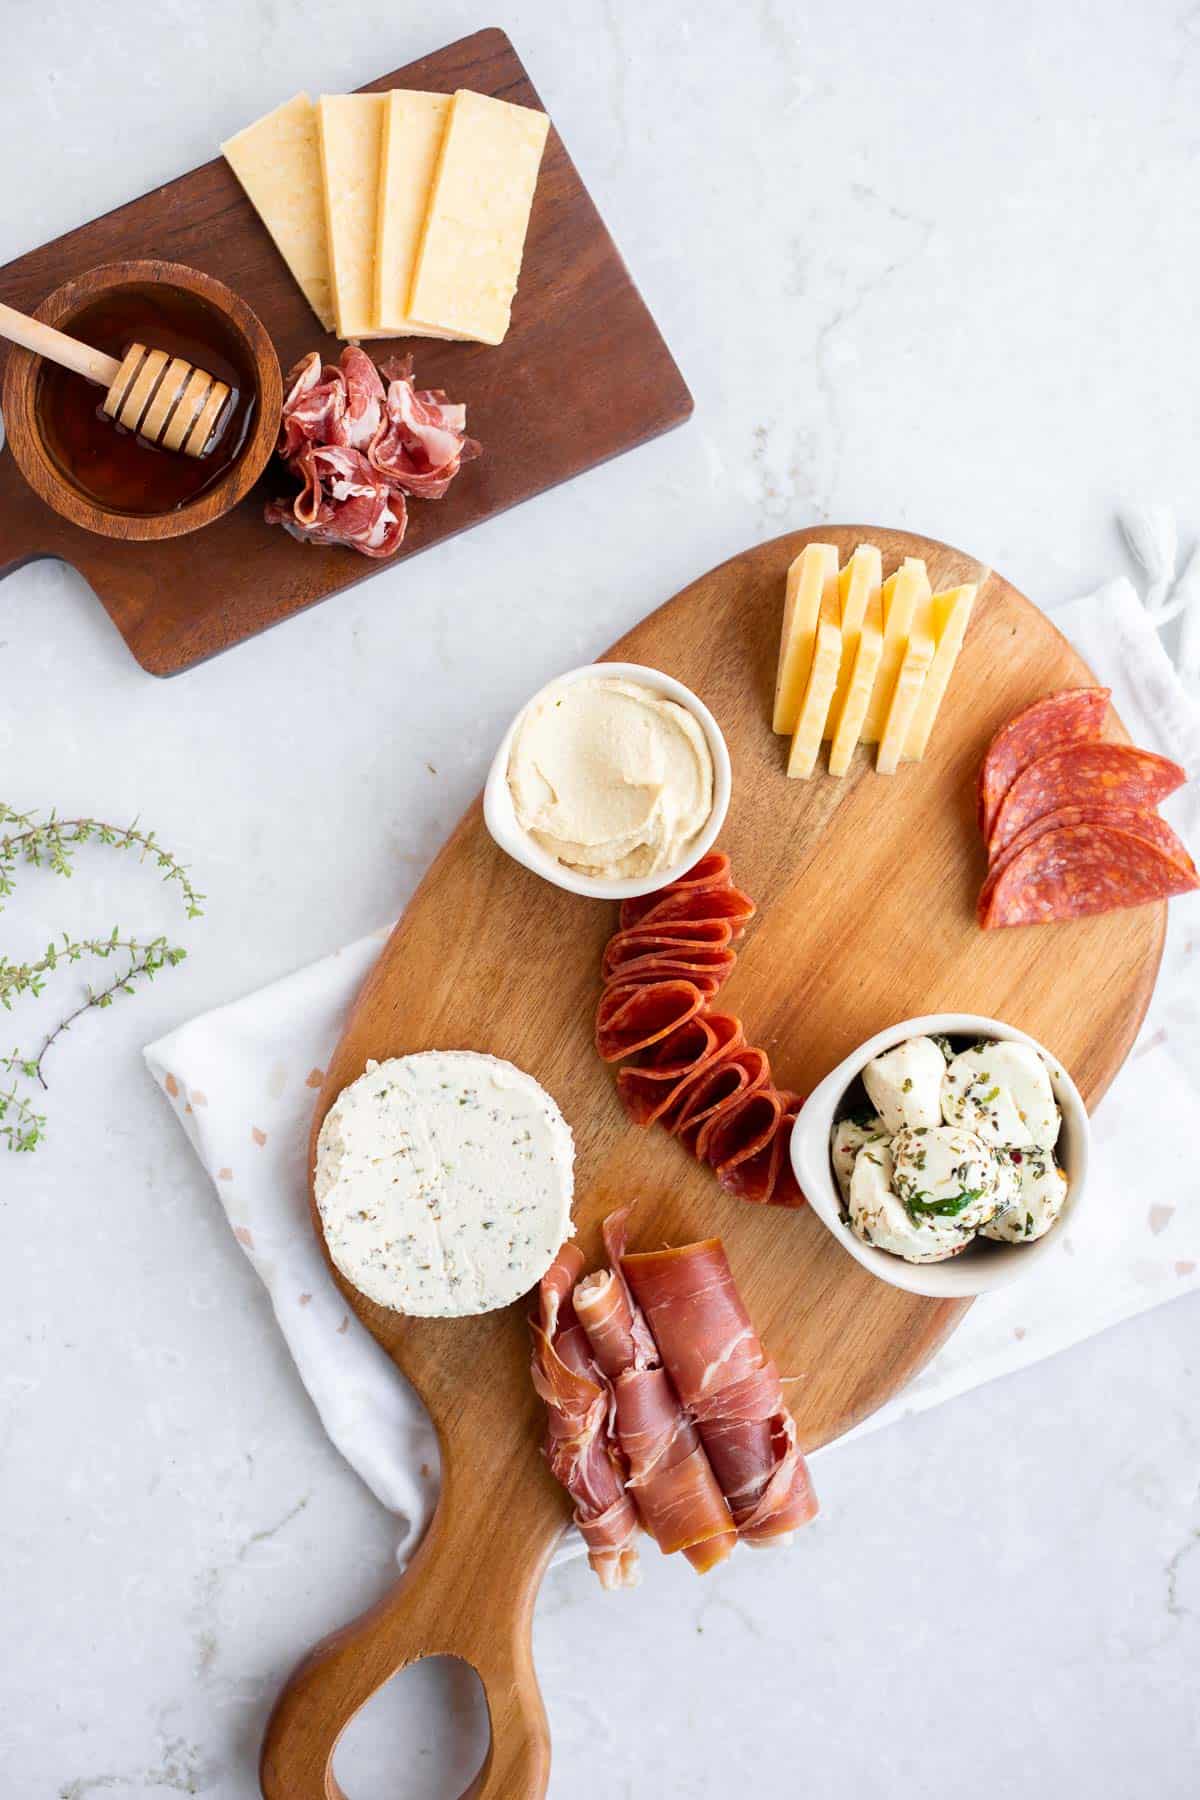 cured meats, cheeses, and hummus on a wooden platter.